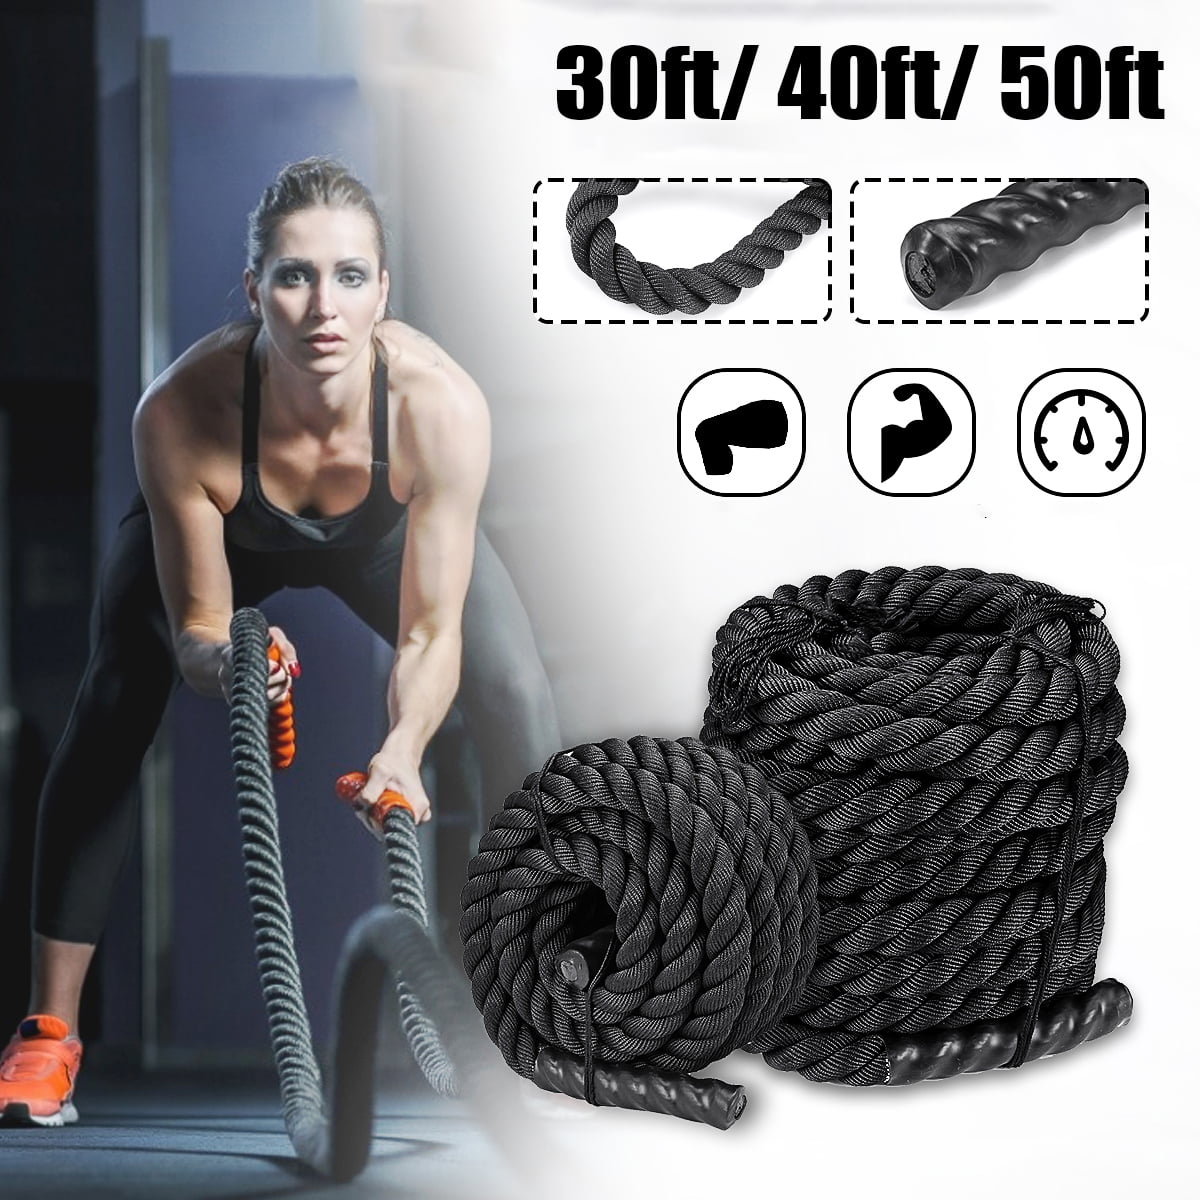 1.5"50FT Training Battle Rope Poly Fitness Battle Rope Strength Training Workout 